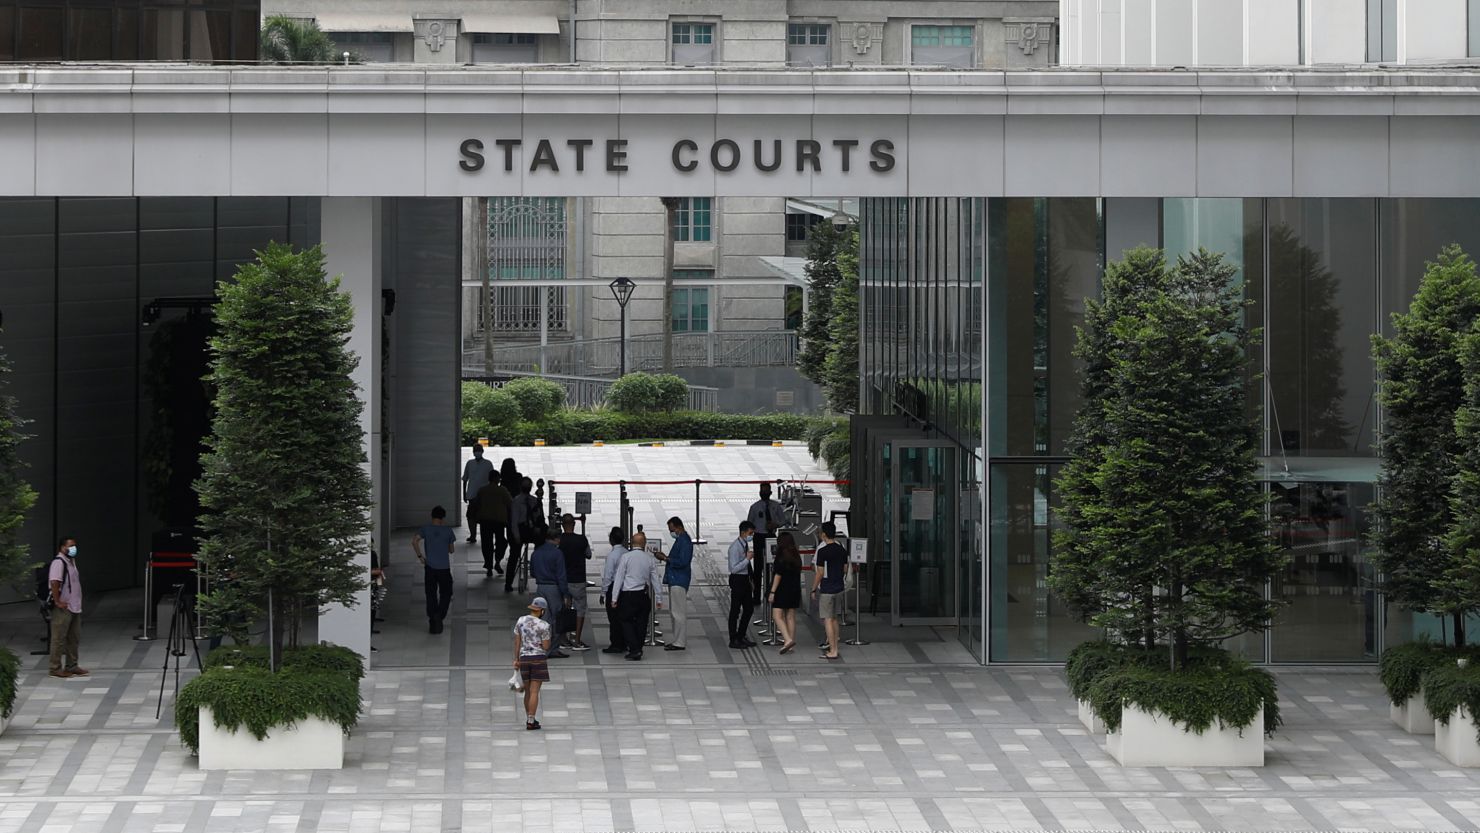 The state courts in Singapore.